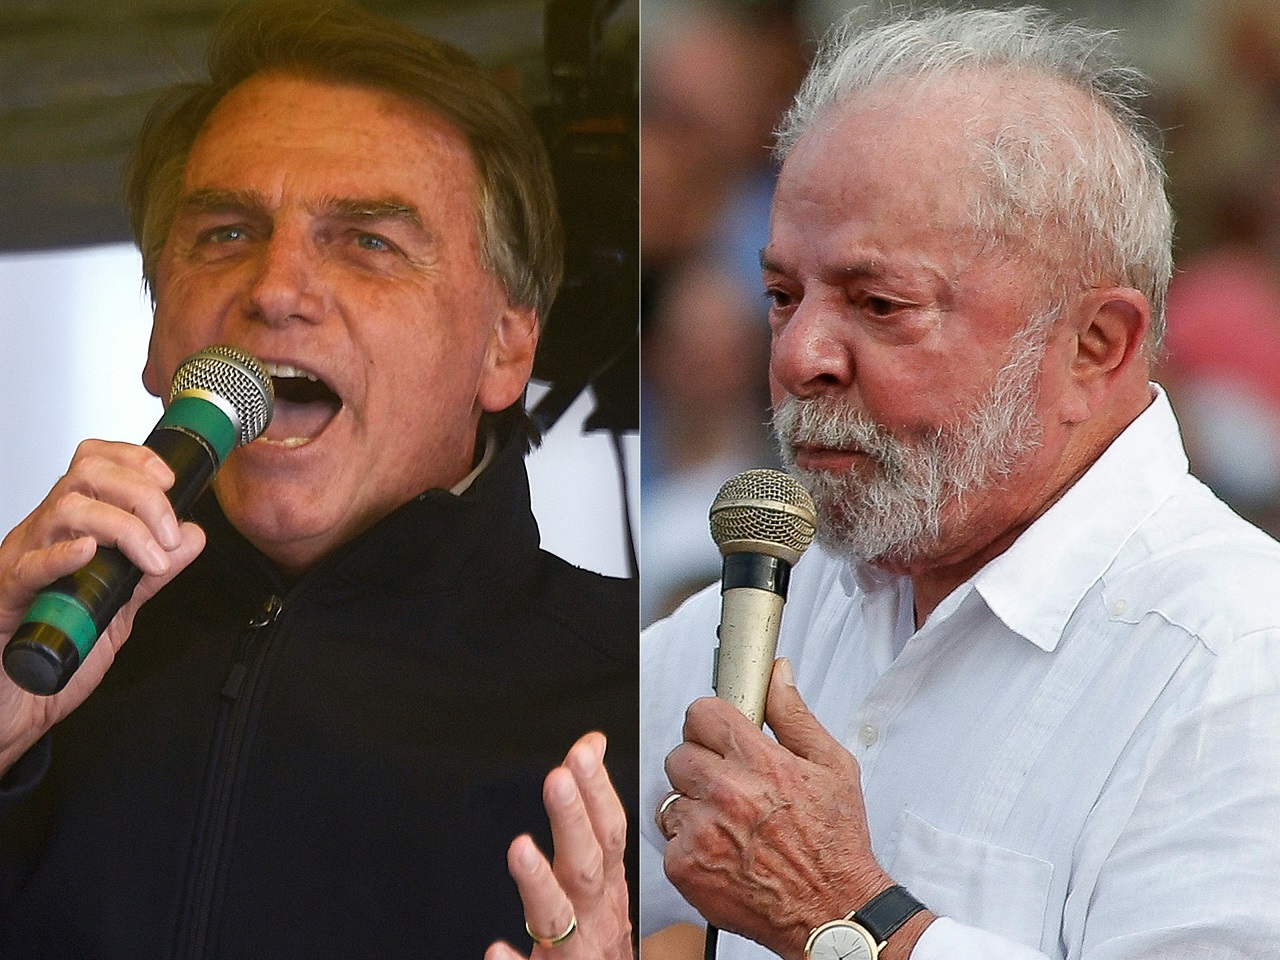 Lula da Silva and Bolsonaro face each other at the polls for the presidency of Brazil